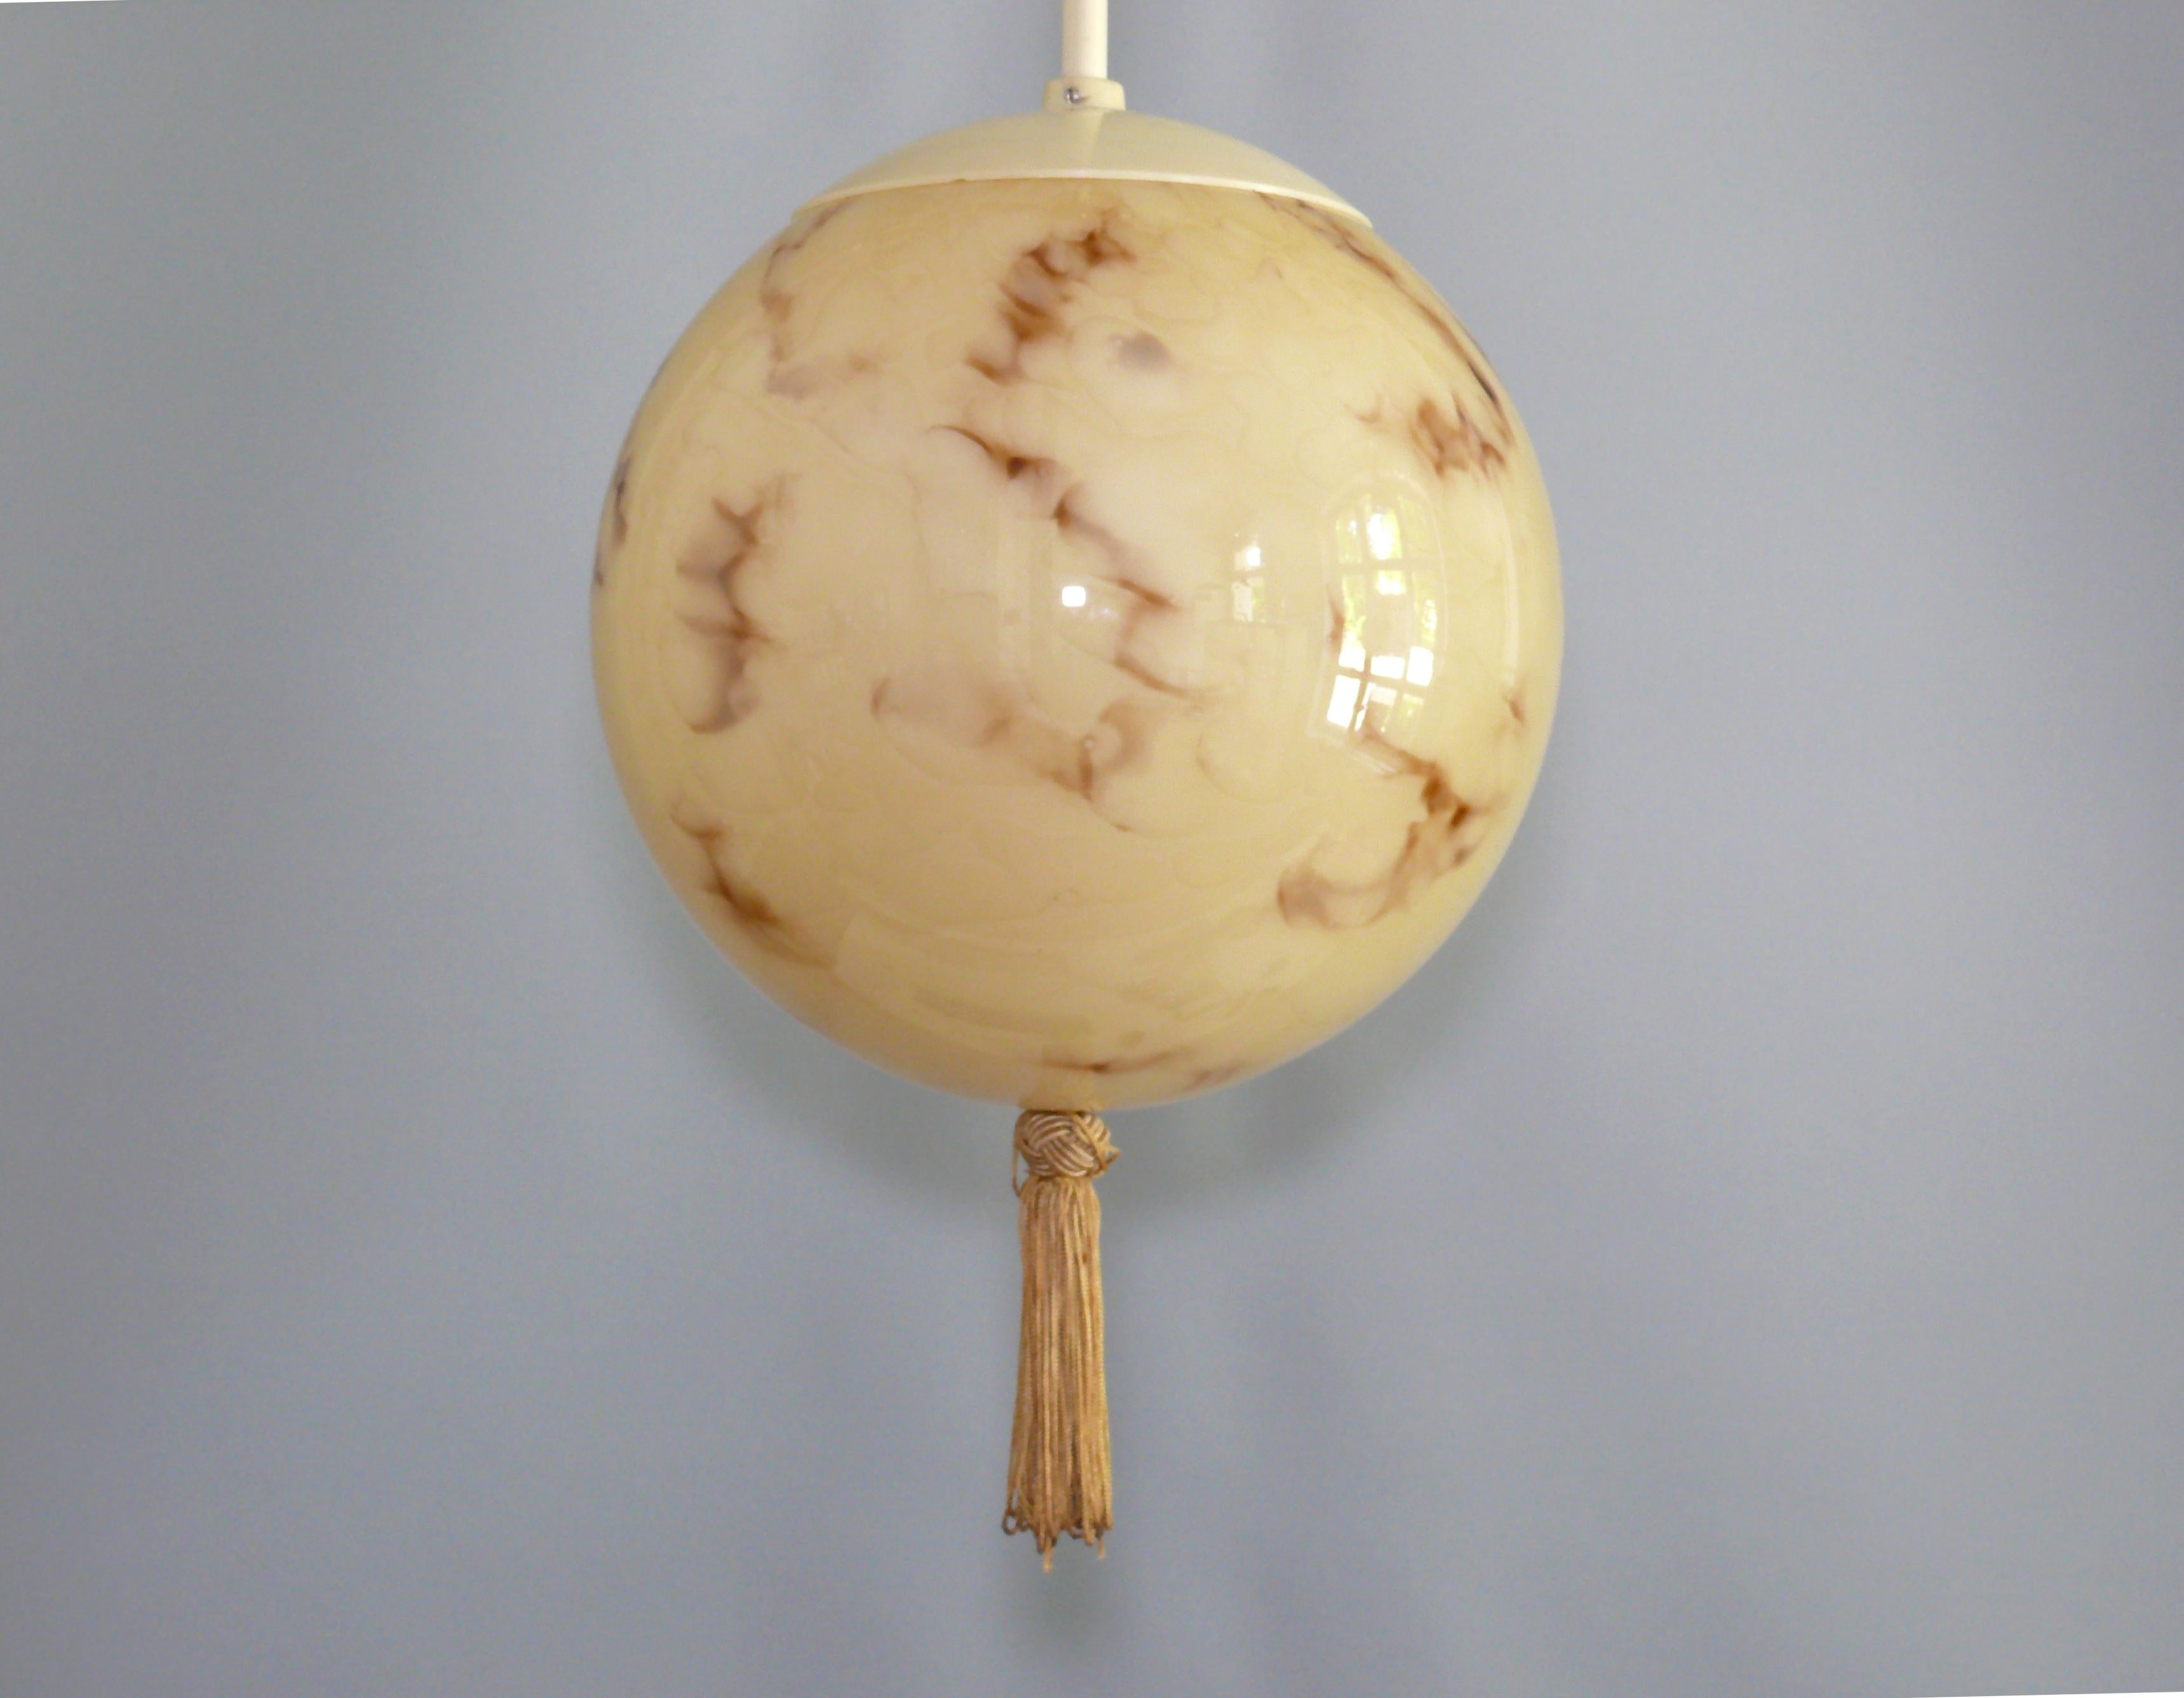 Art Deco ball lamp with rod suspension, tassel and marbled glass shade. The beige glass shade is crossed by brown stripes. The lamp dates from the first half of the 20th century (1930 - 1950). The glass shade is in perfect condition, the metal and